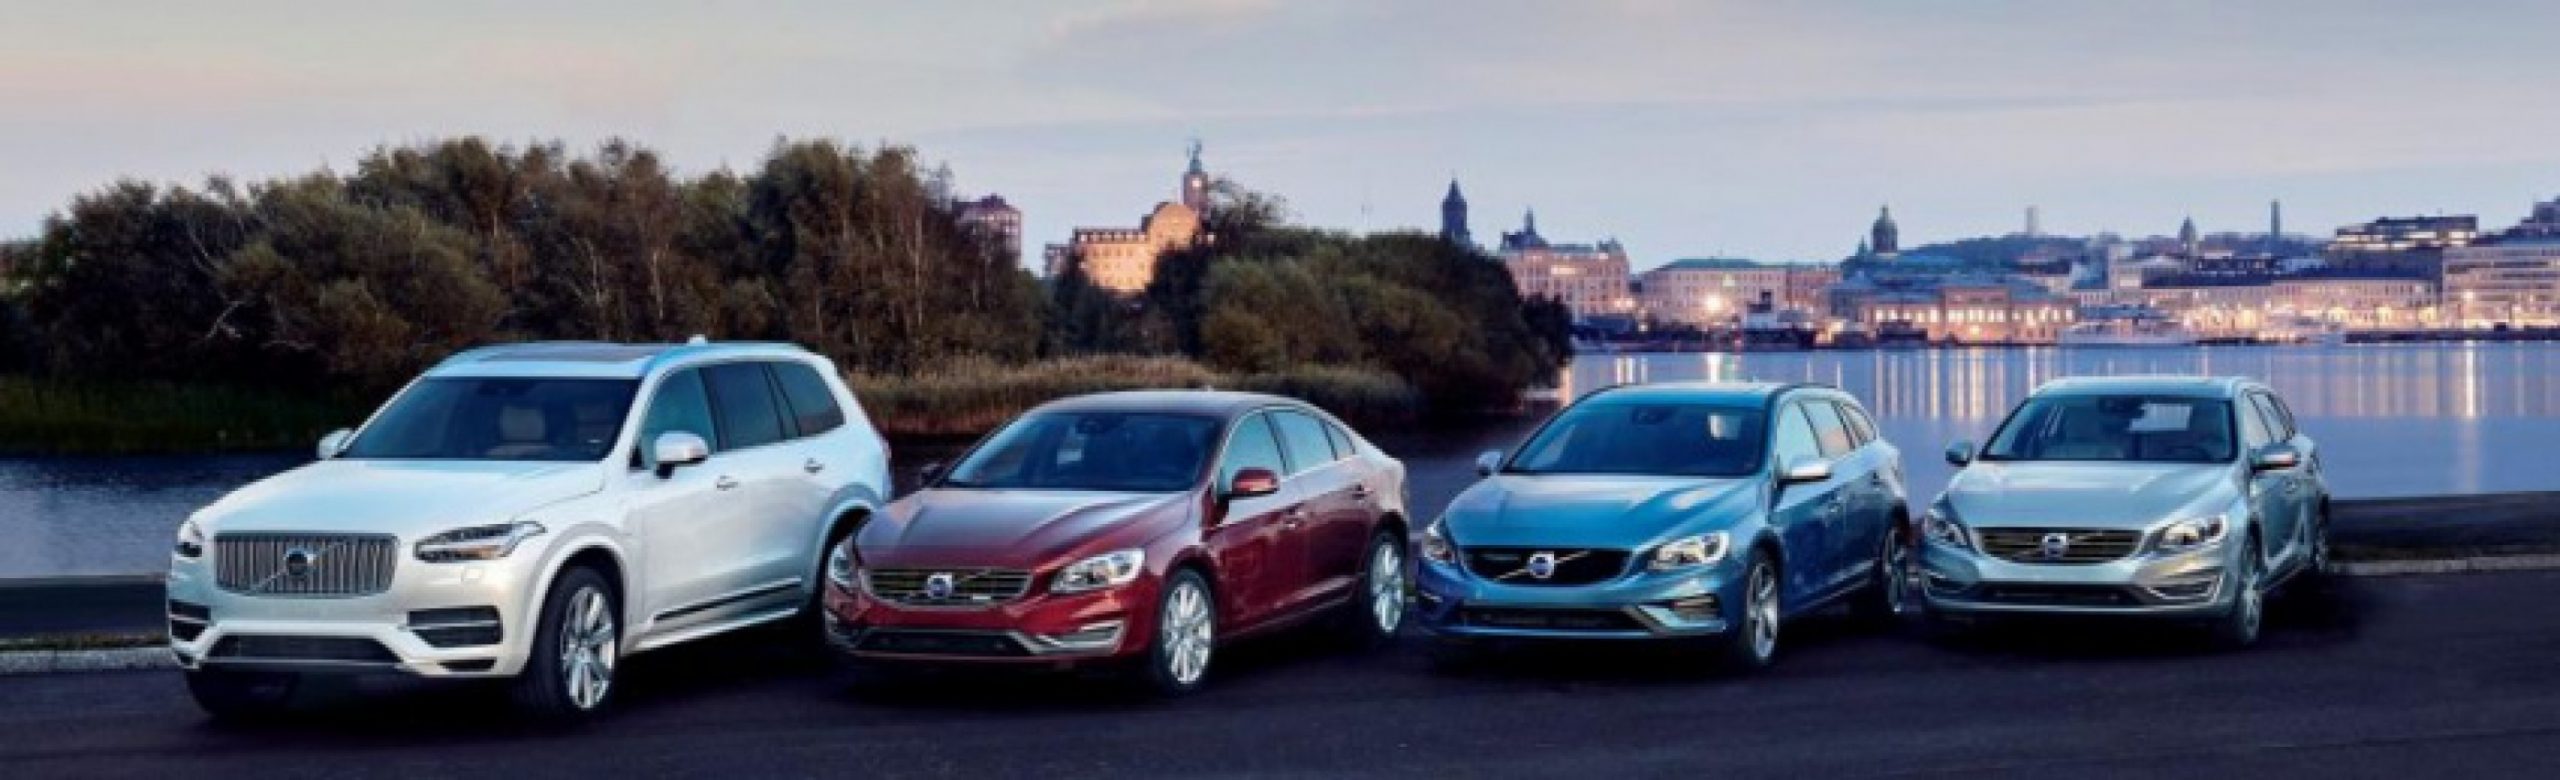 autos, cars, volvo, volvo aims for its first ev by 2019